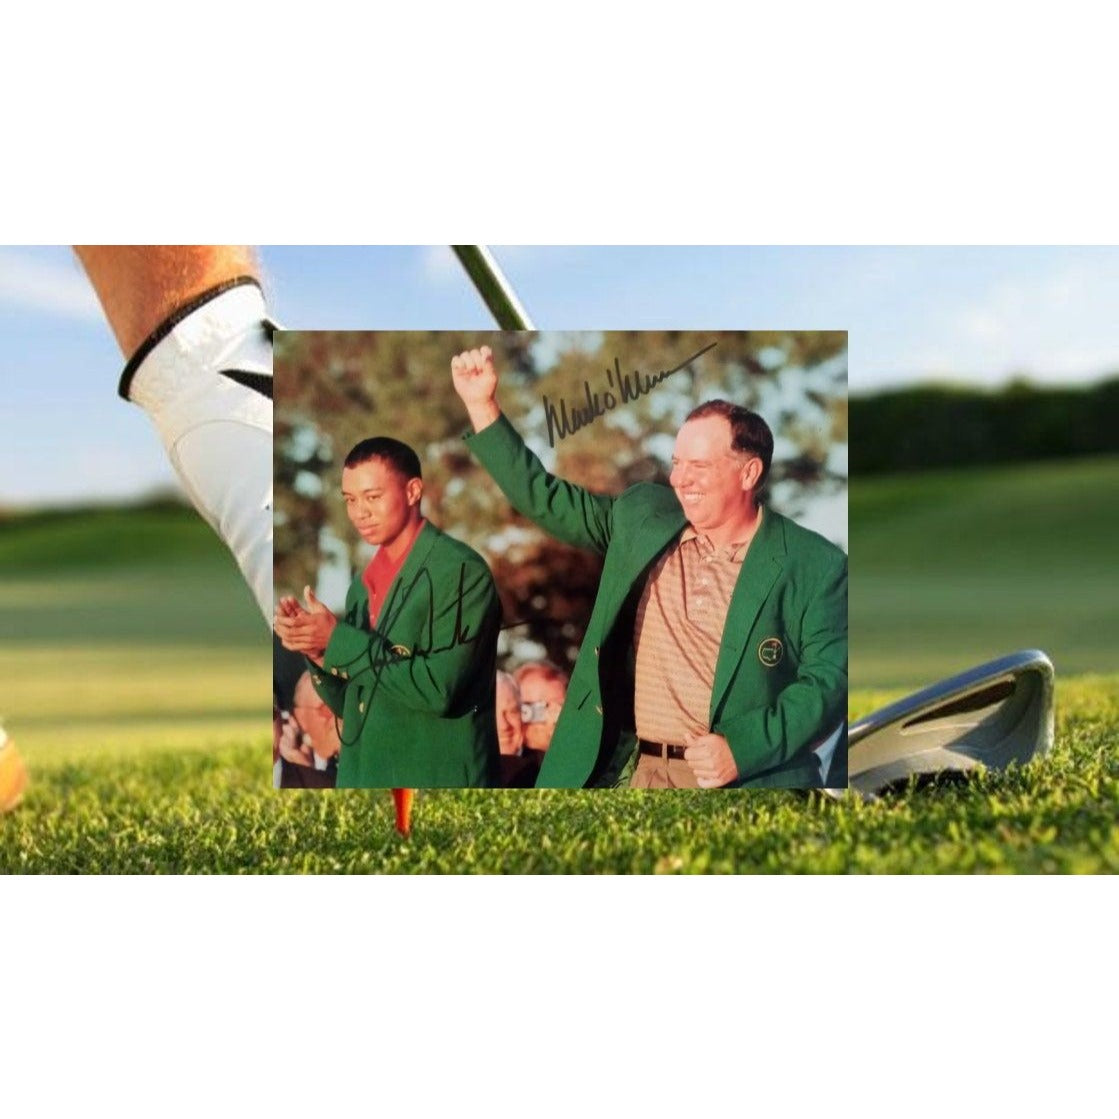 Tiger Woods and Mark O'Meara 8 x 10 signed photo with proof